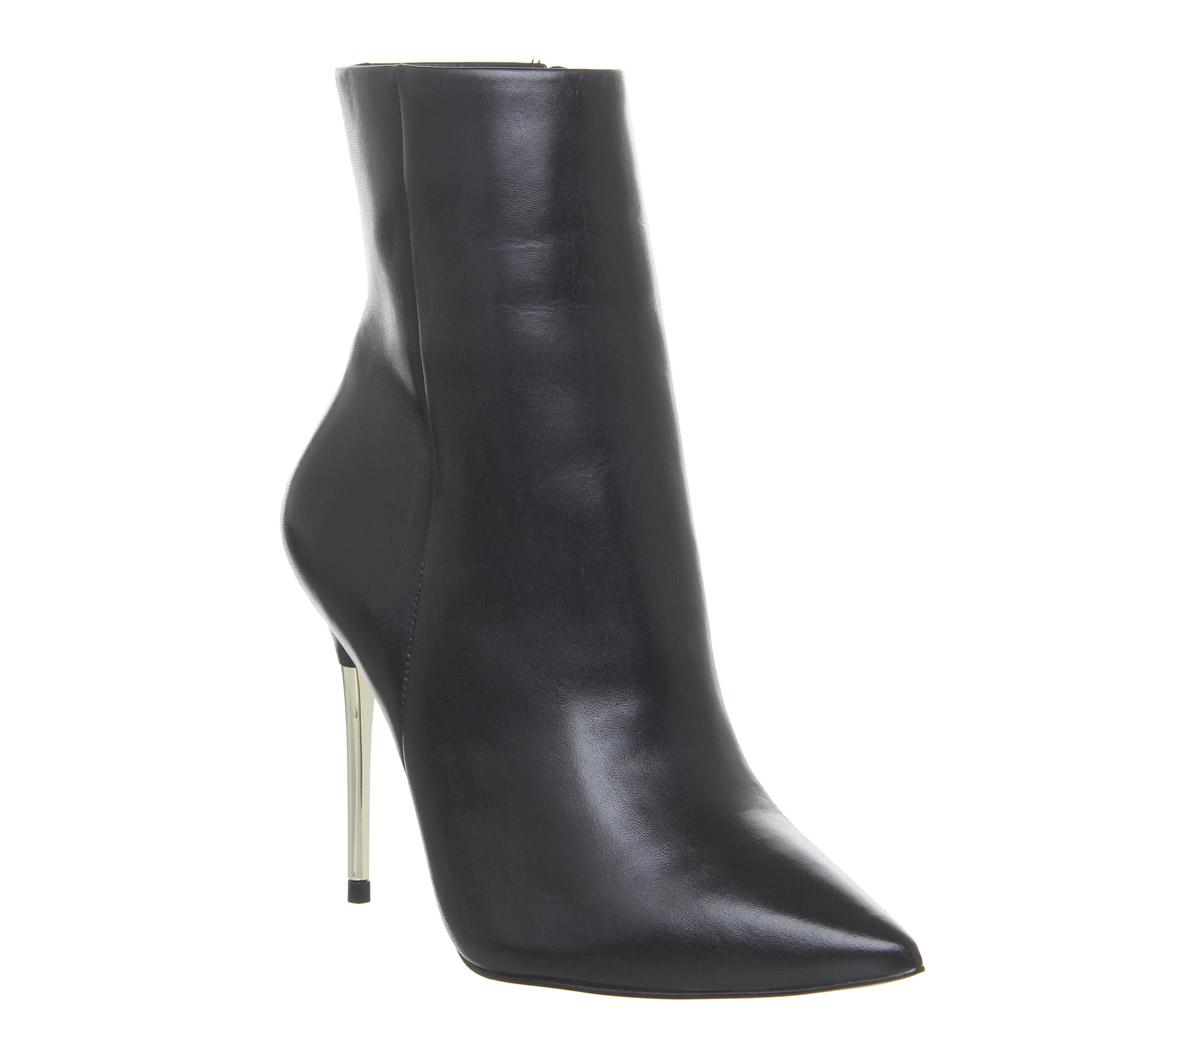 OFFICE Aspire Metal Heel Point Boots Black Leather - Women's Ankle Boots